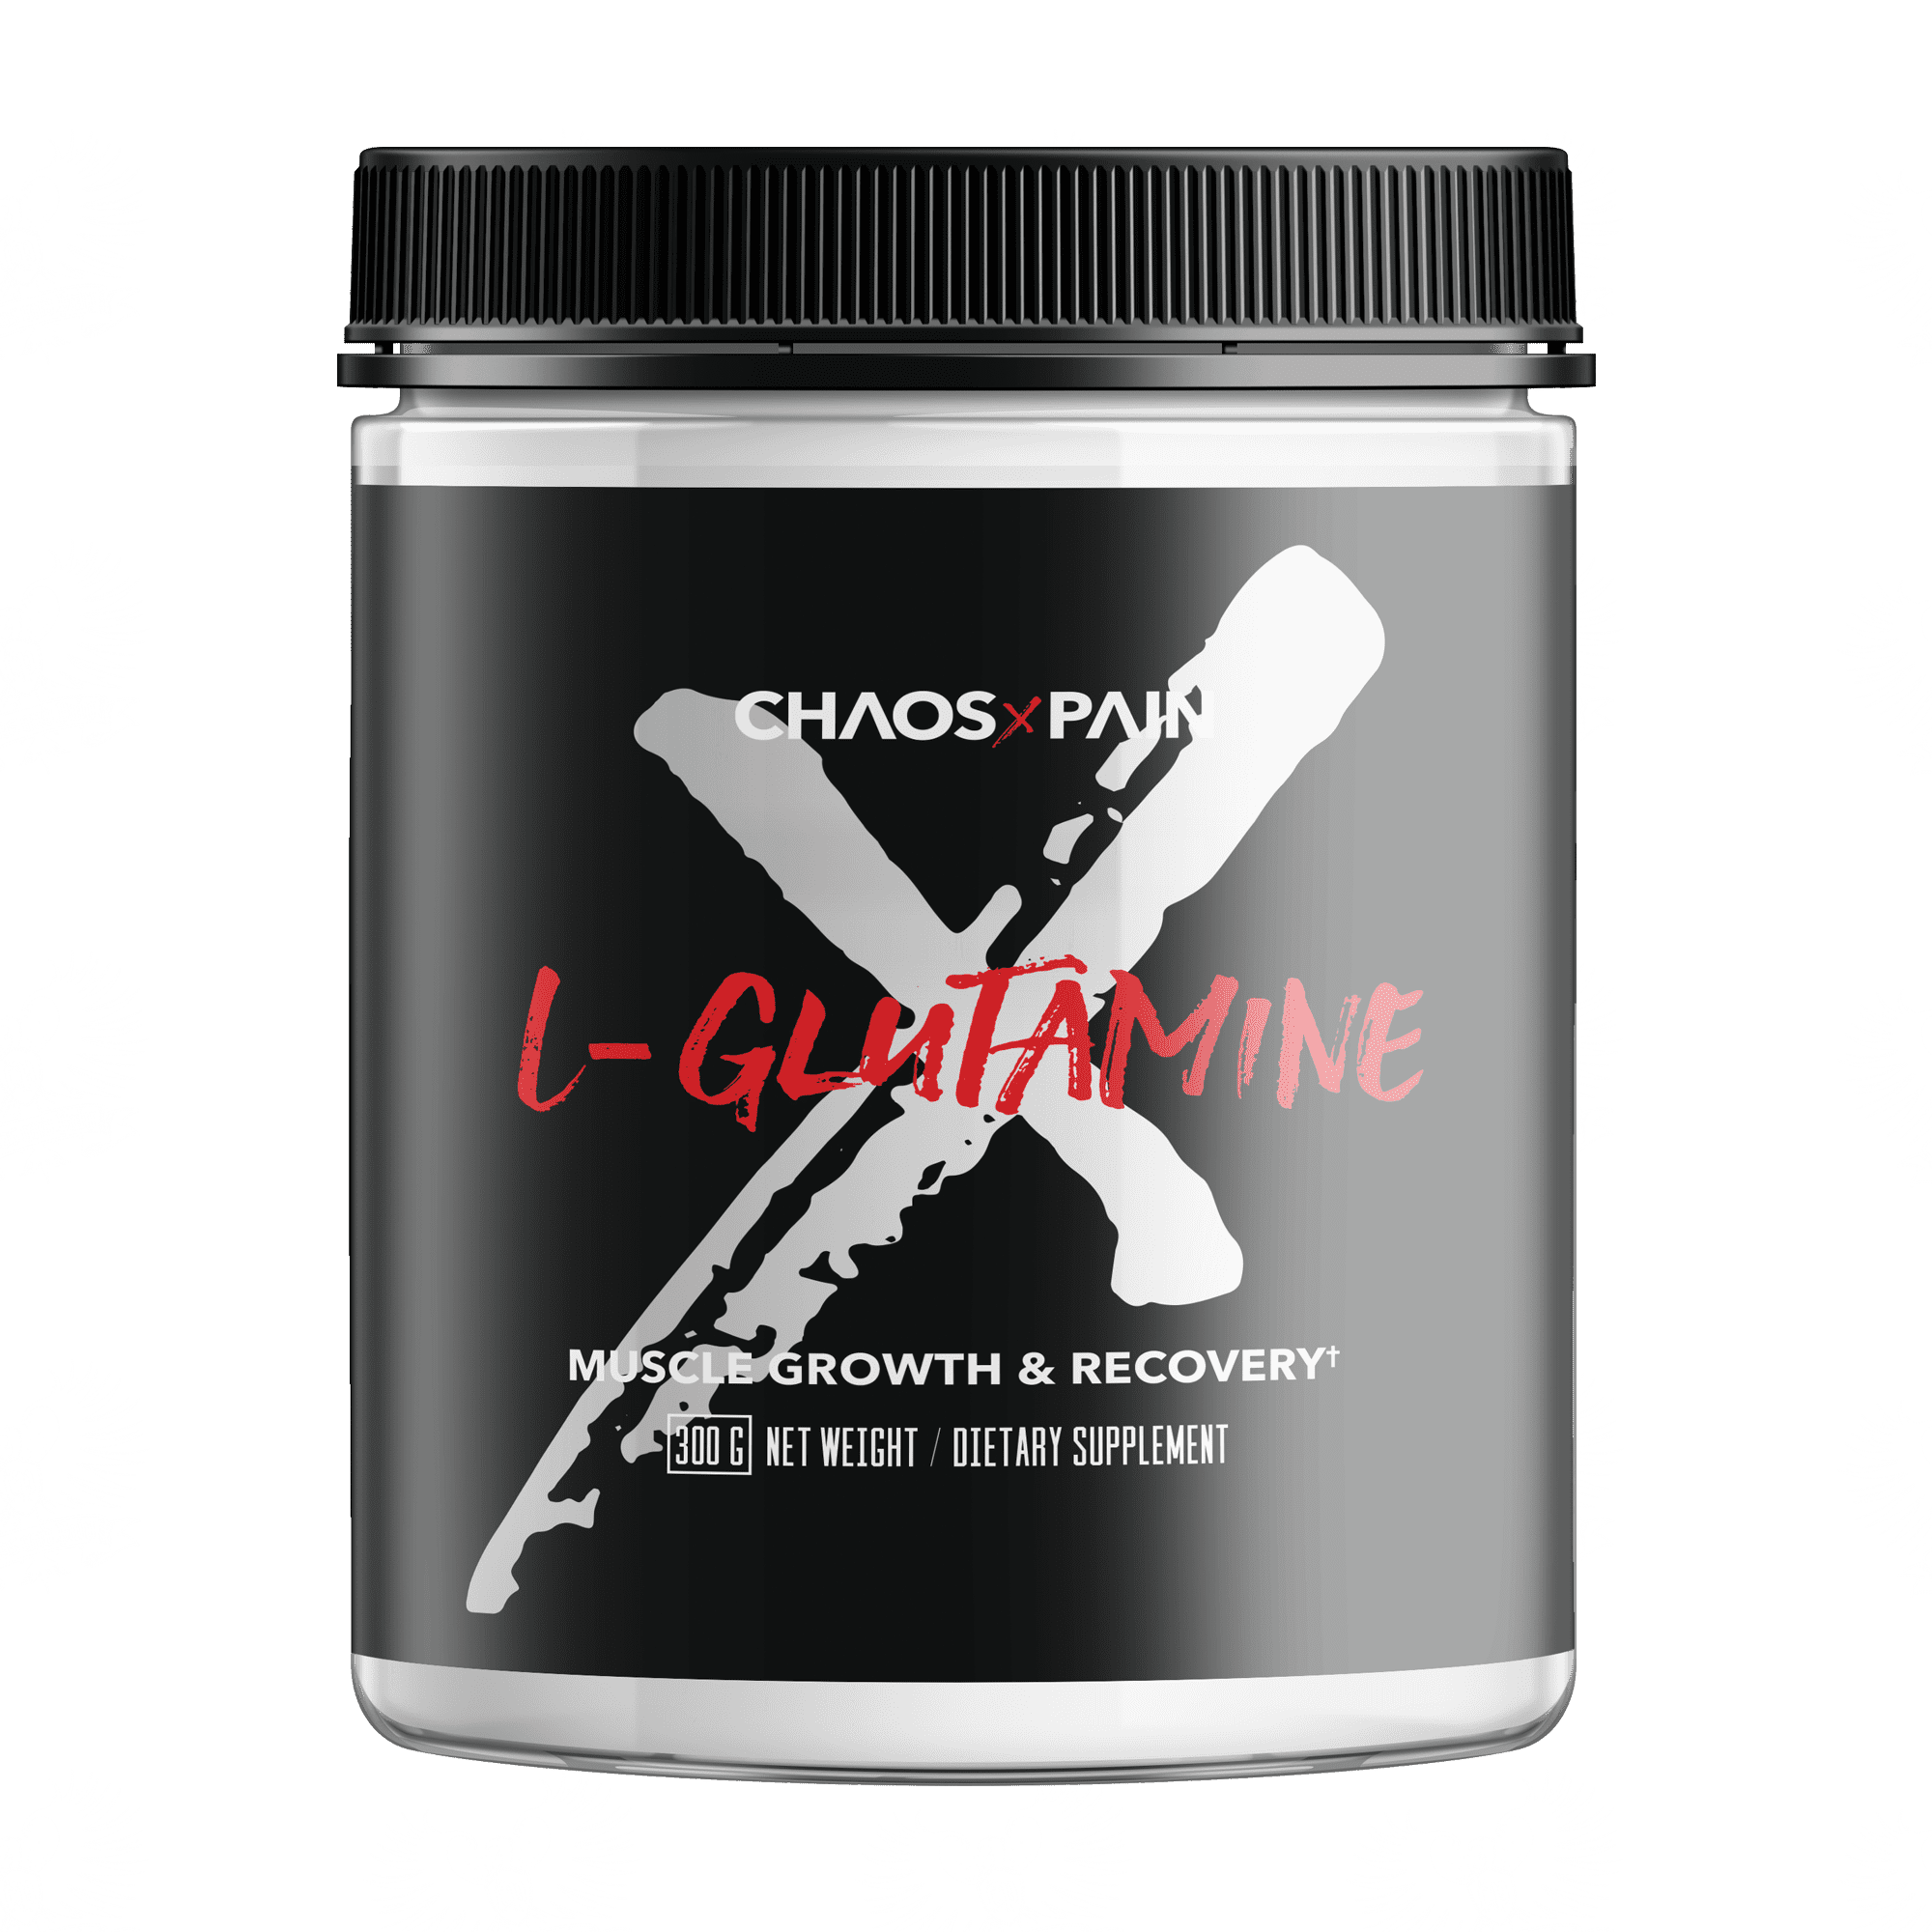 L-GLUTAMINE - MUSCLE GROWTH AND RECOVERY